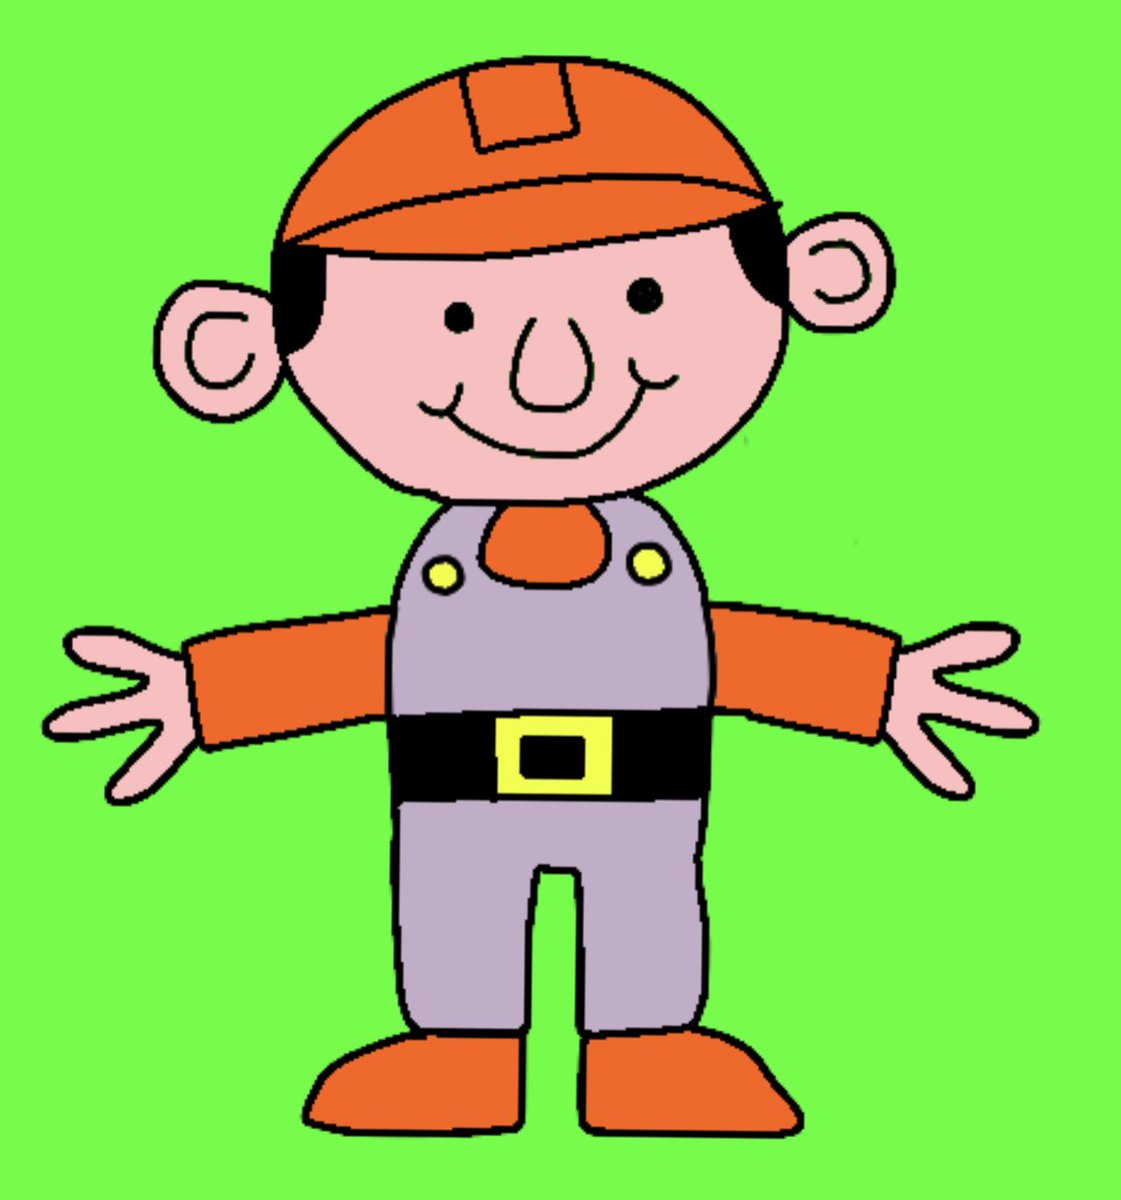 How to draw Bob the Builder